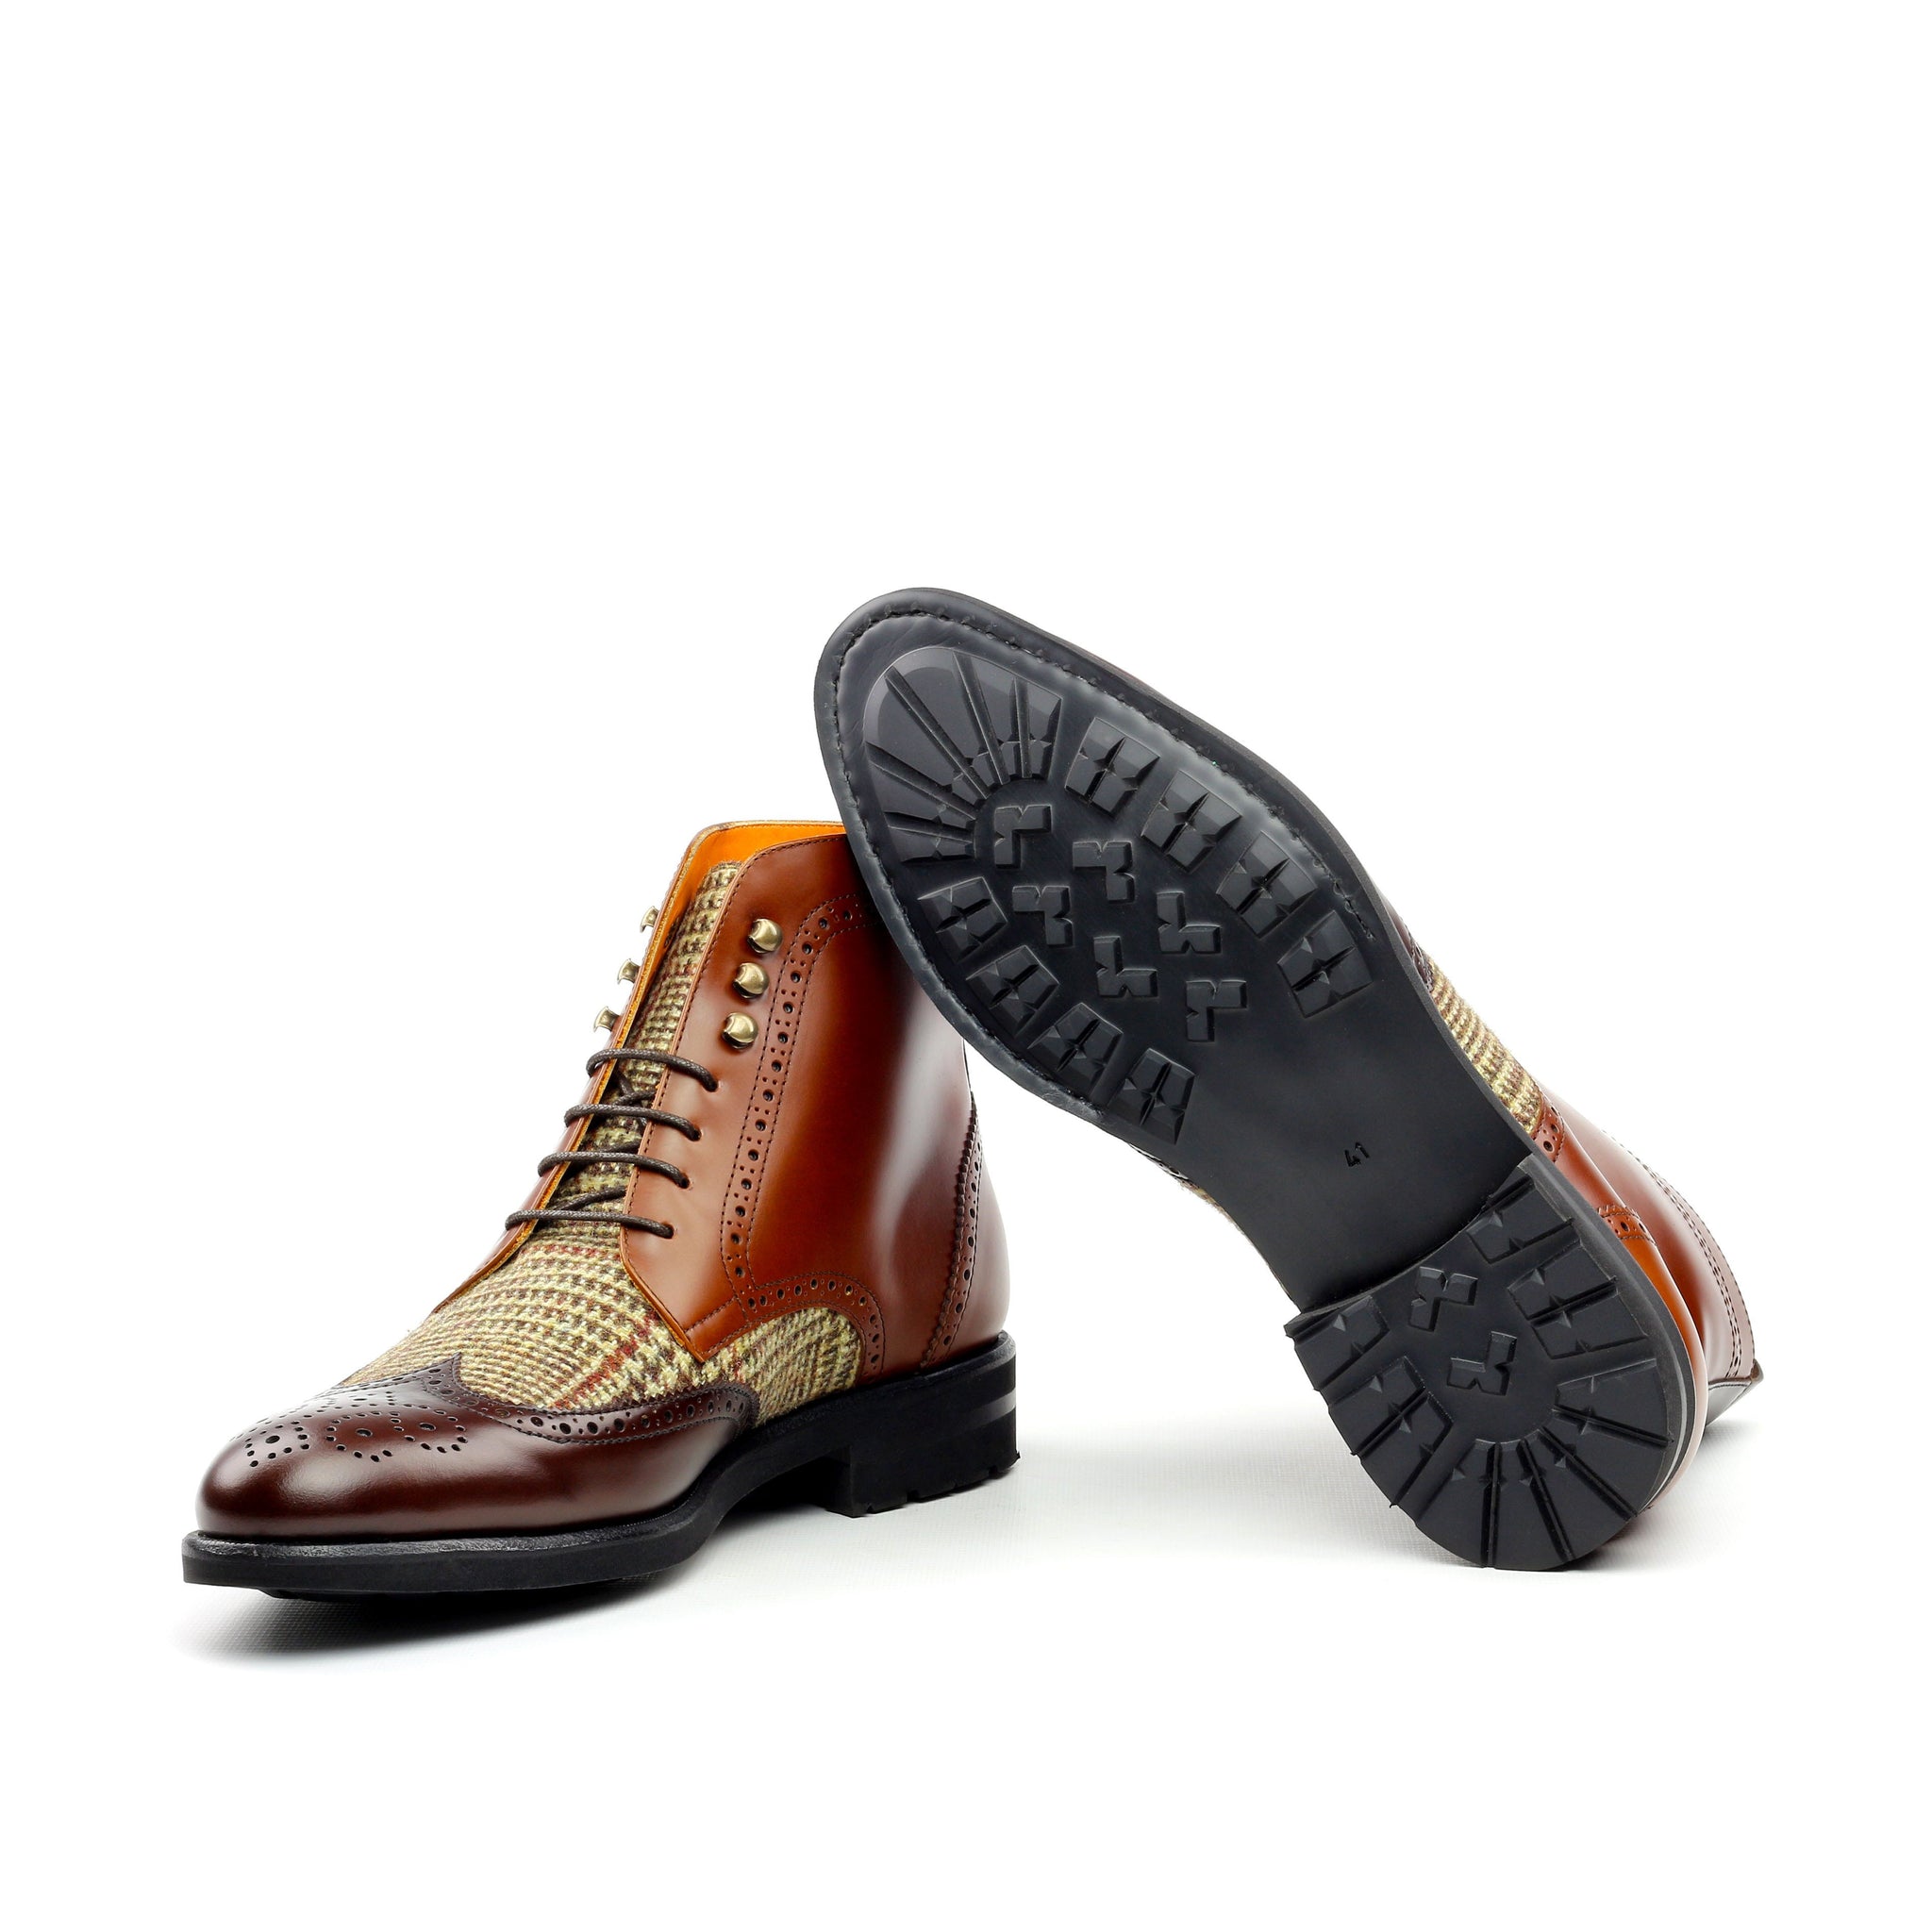 Unique Handcrafted Cognac Polish Calf Military Style Brogue Boot